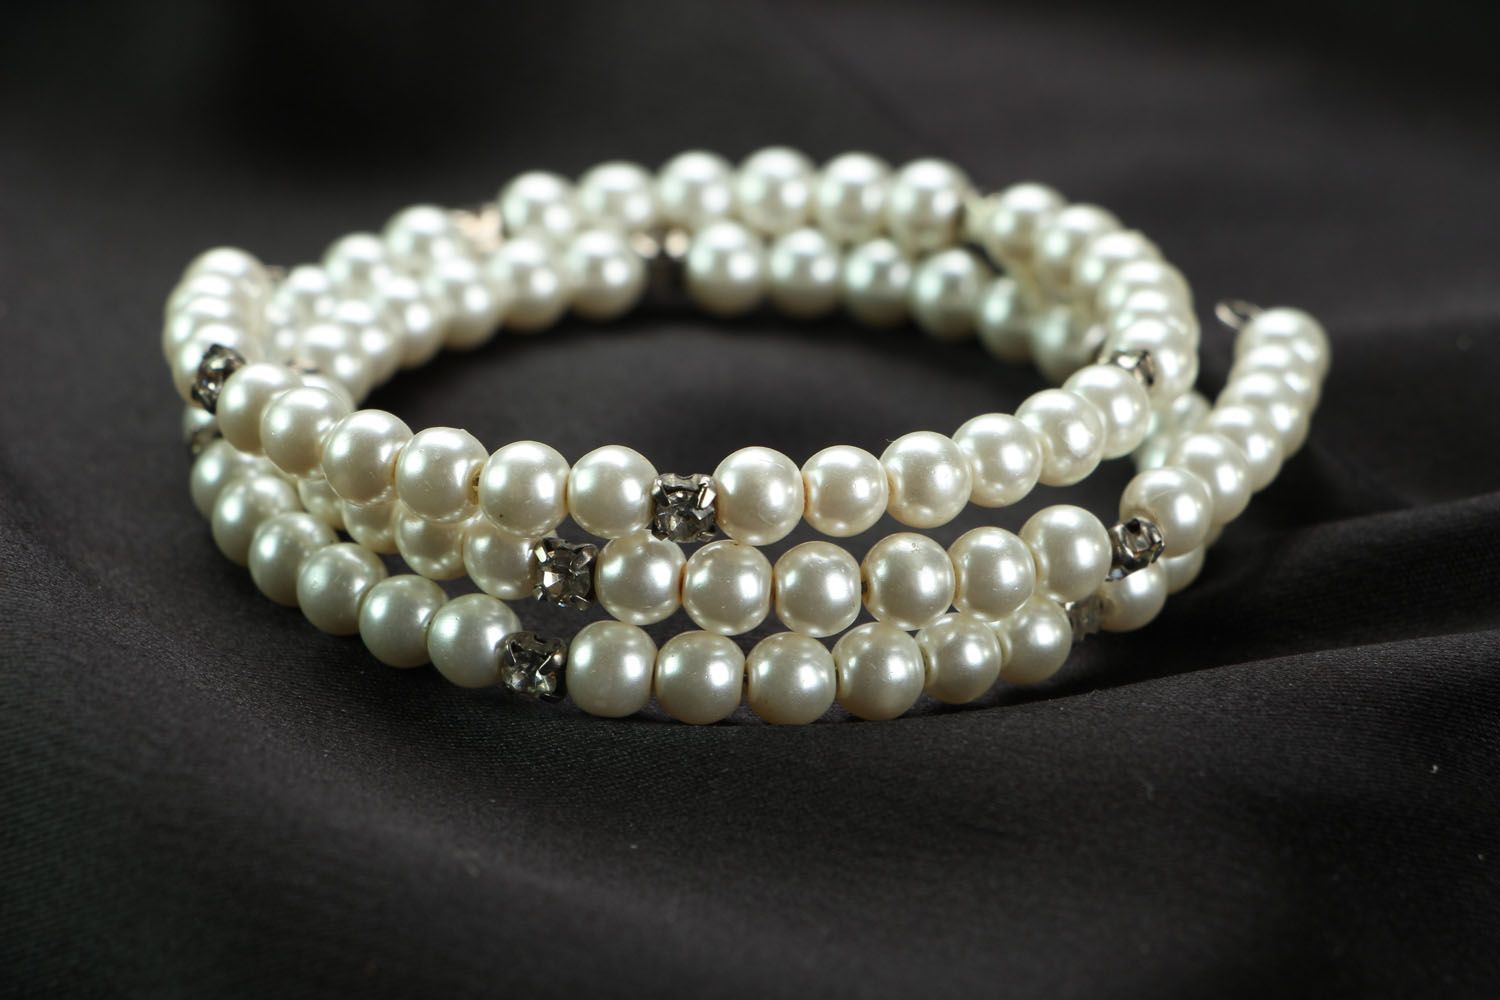 Bracelet made of artificial pearls photo 2